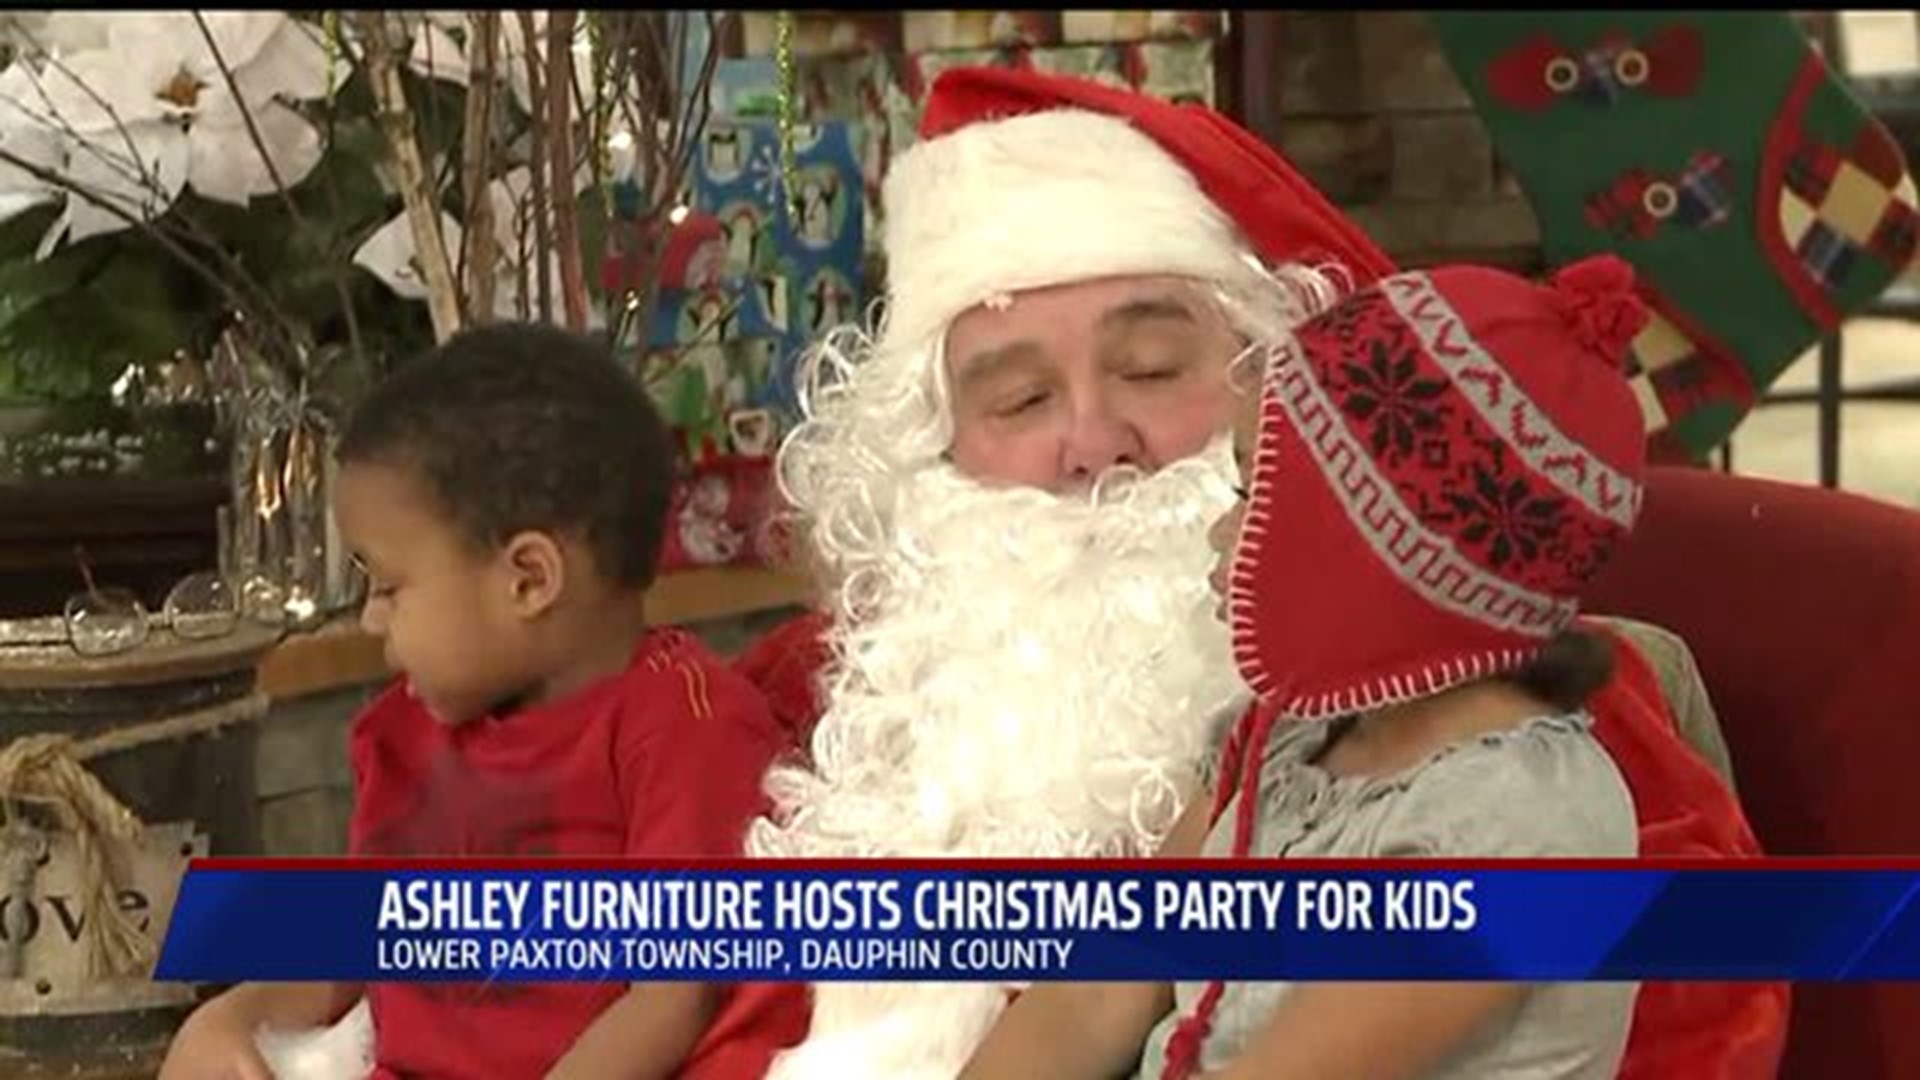 Ashley Furniture Homestores hosts Christmas party for local kids in need